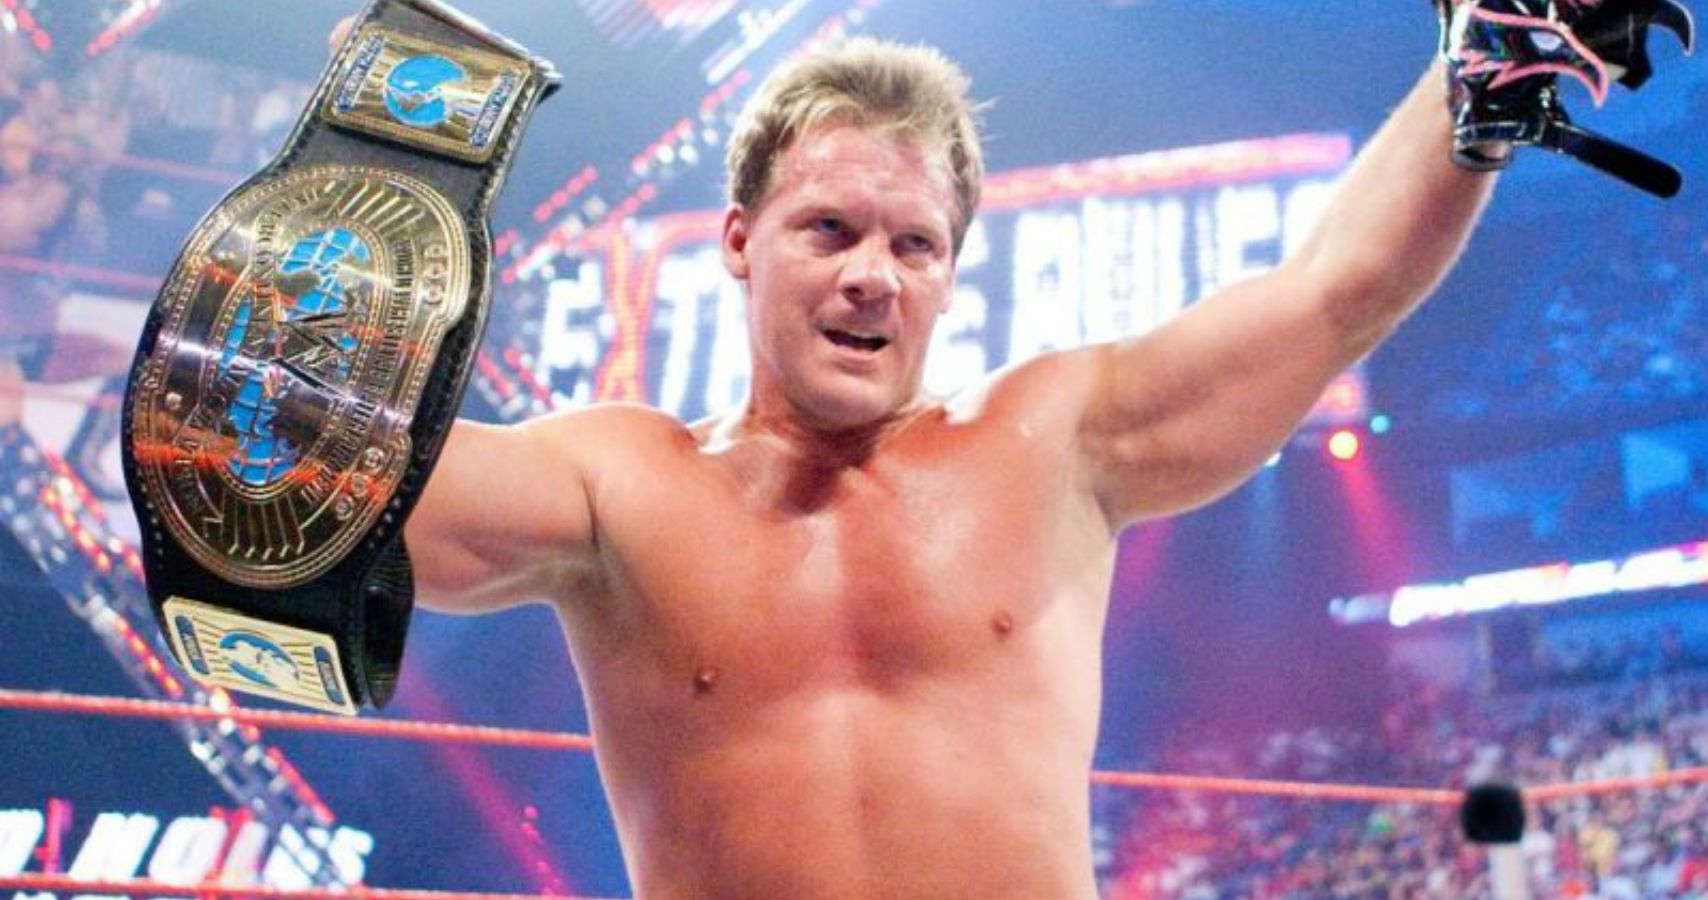 Chris Jericho Reacts To His Omission From WWE's Intercontinental Title